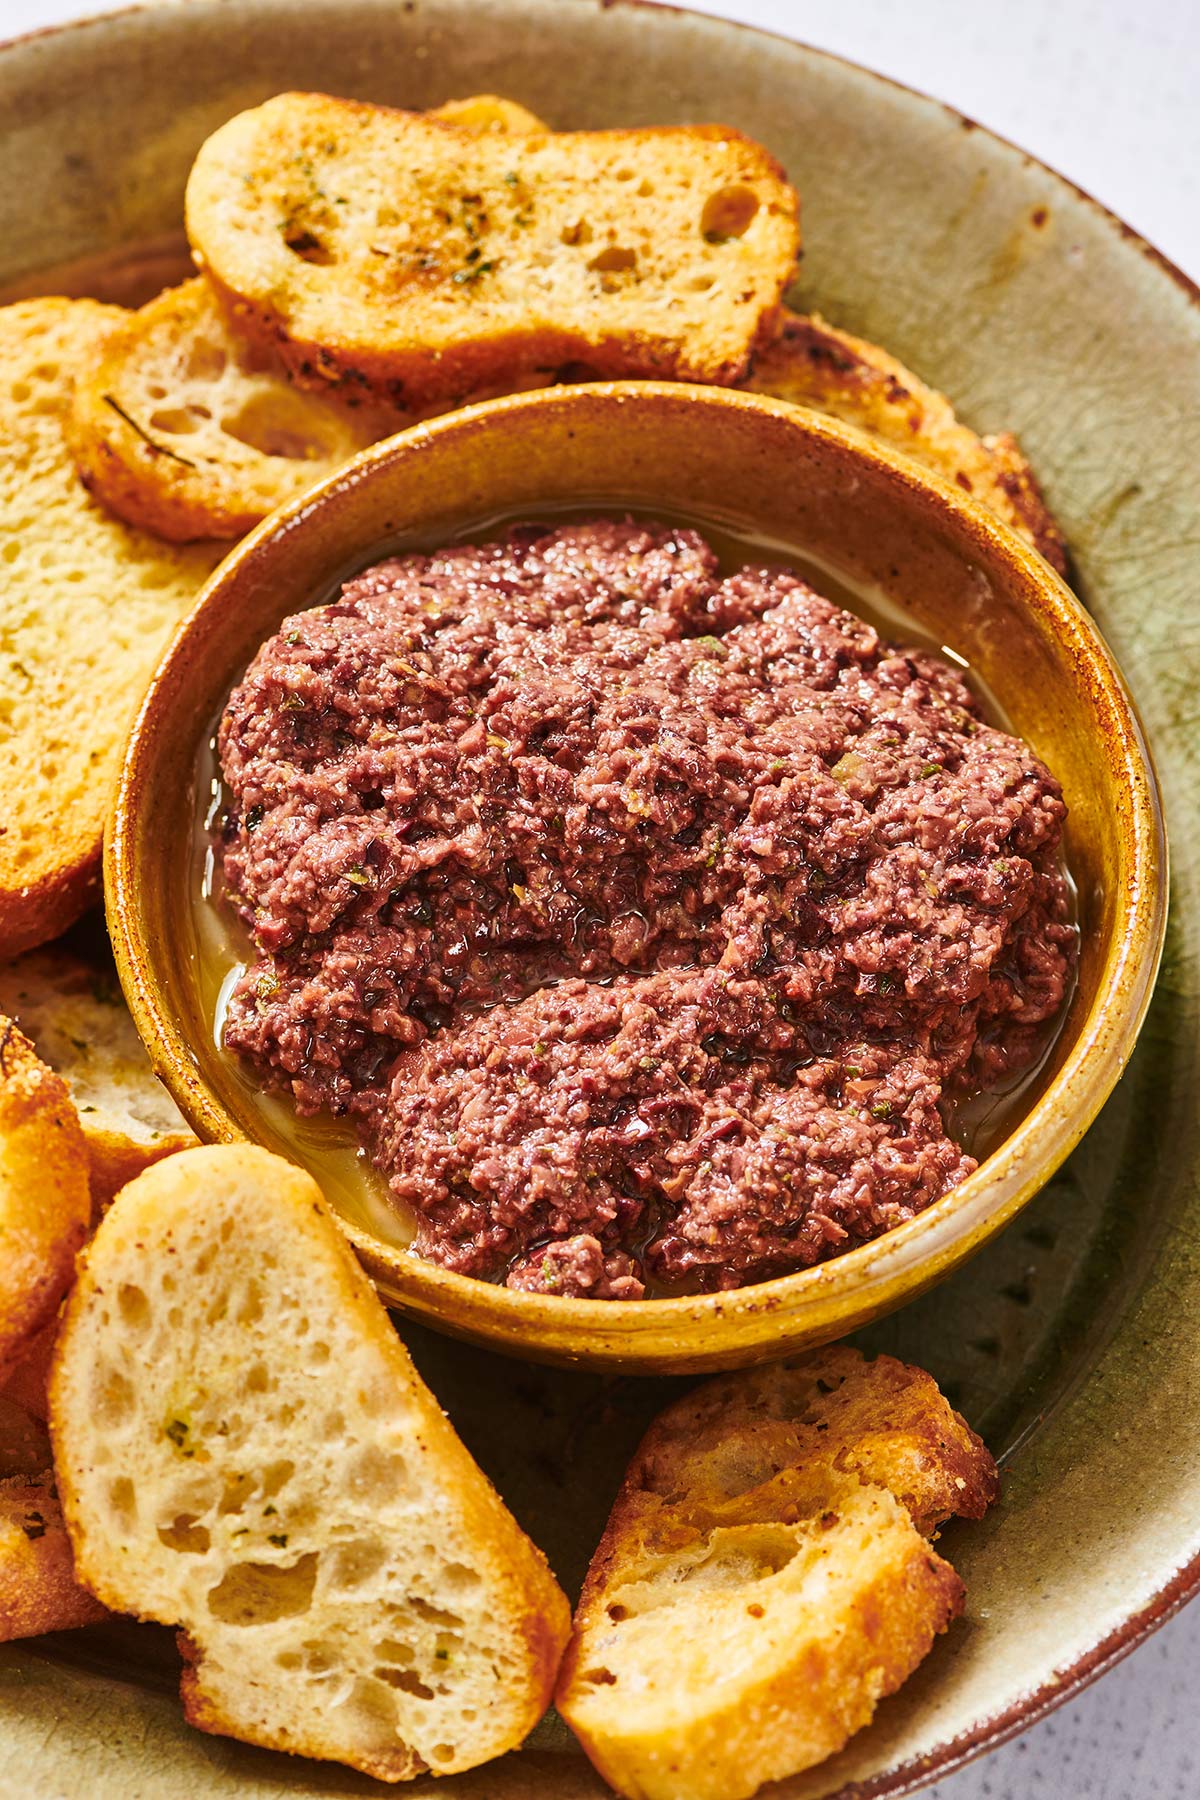 Bowl of Black Olive Tapenade on tray with crostini bread.